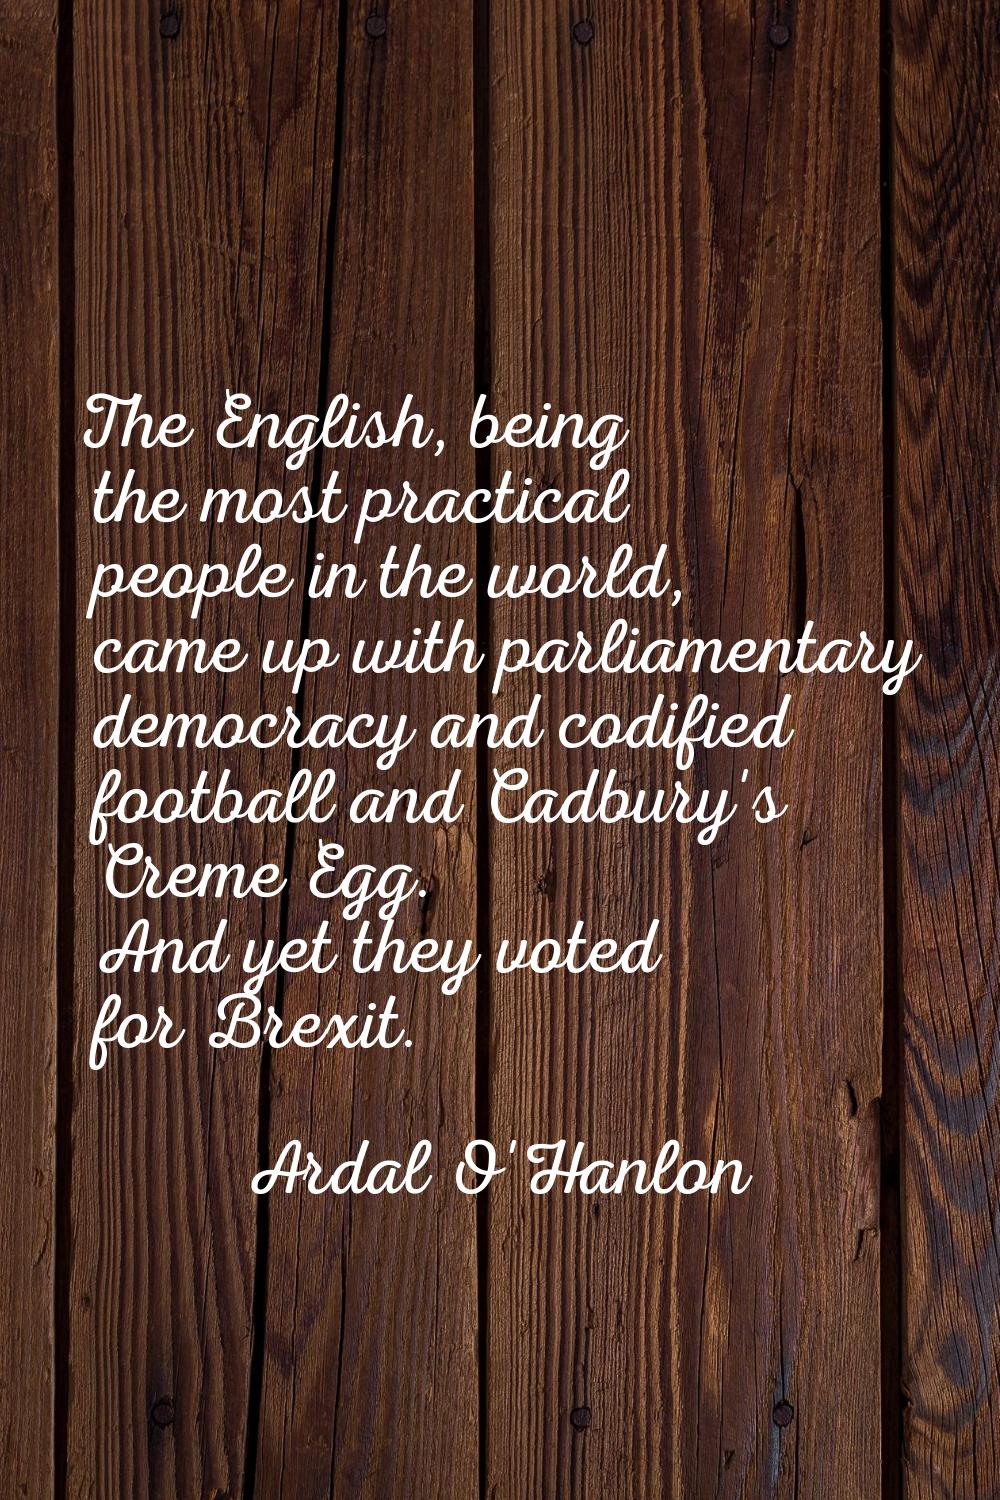 The English, being the most practical people in the world, came up with parliamentary democracy and